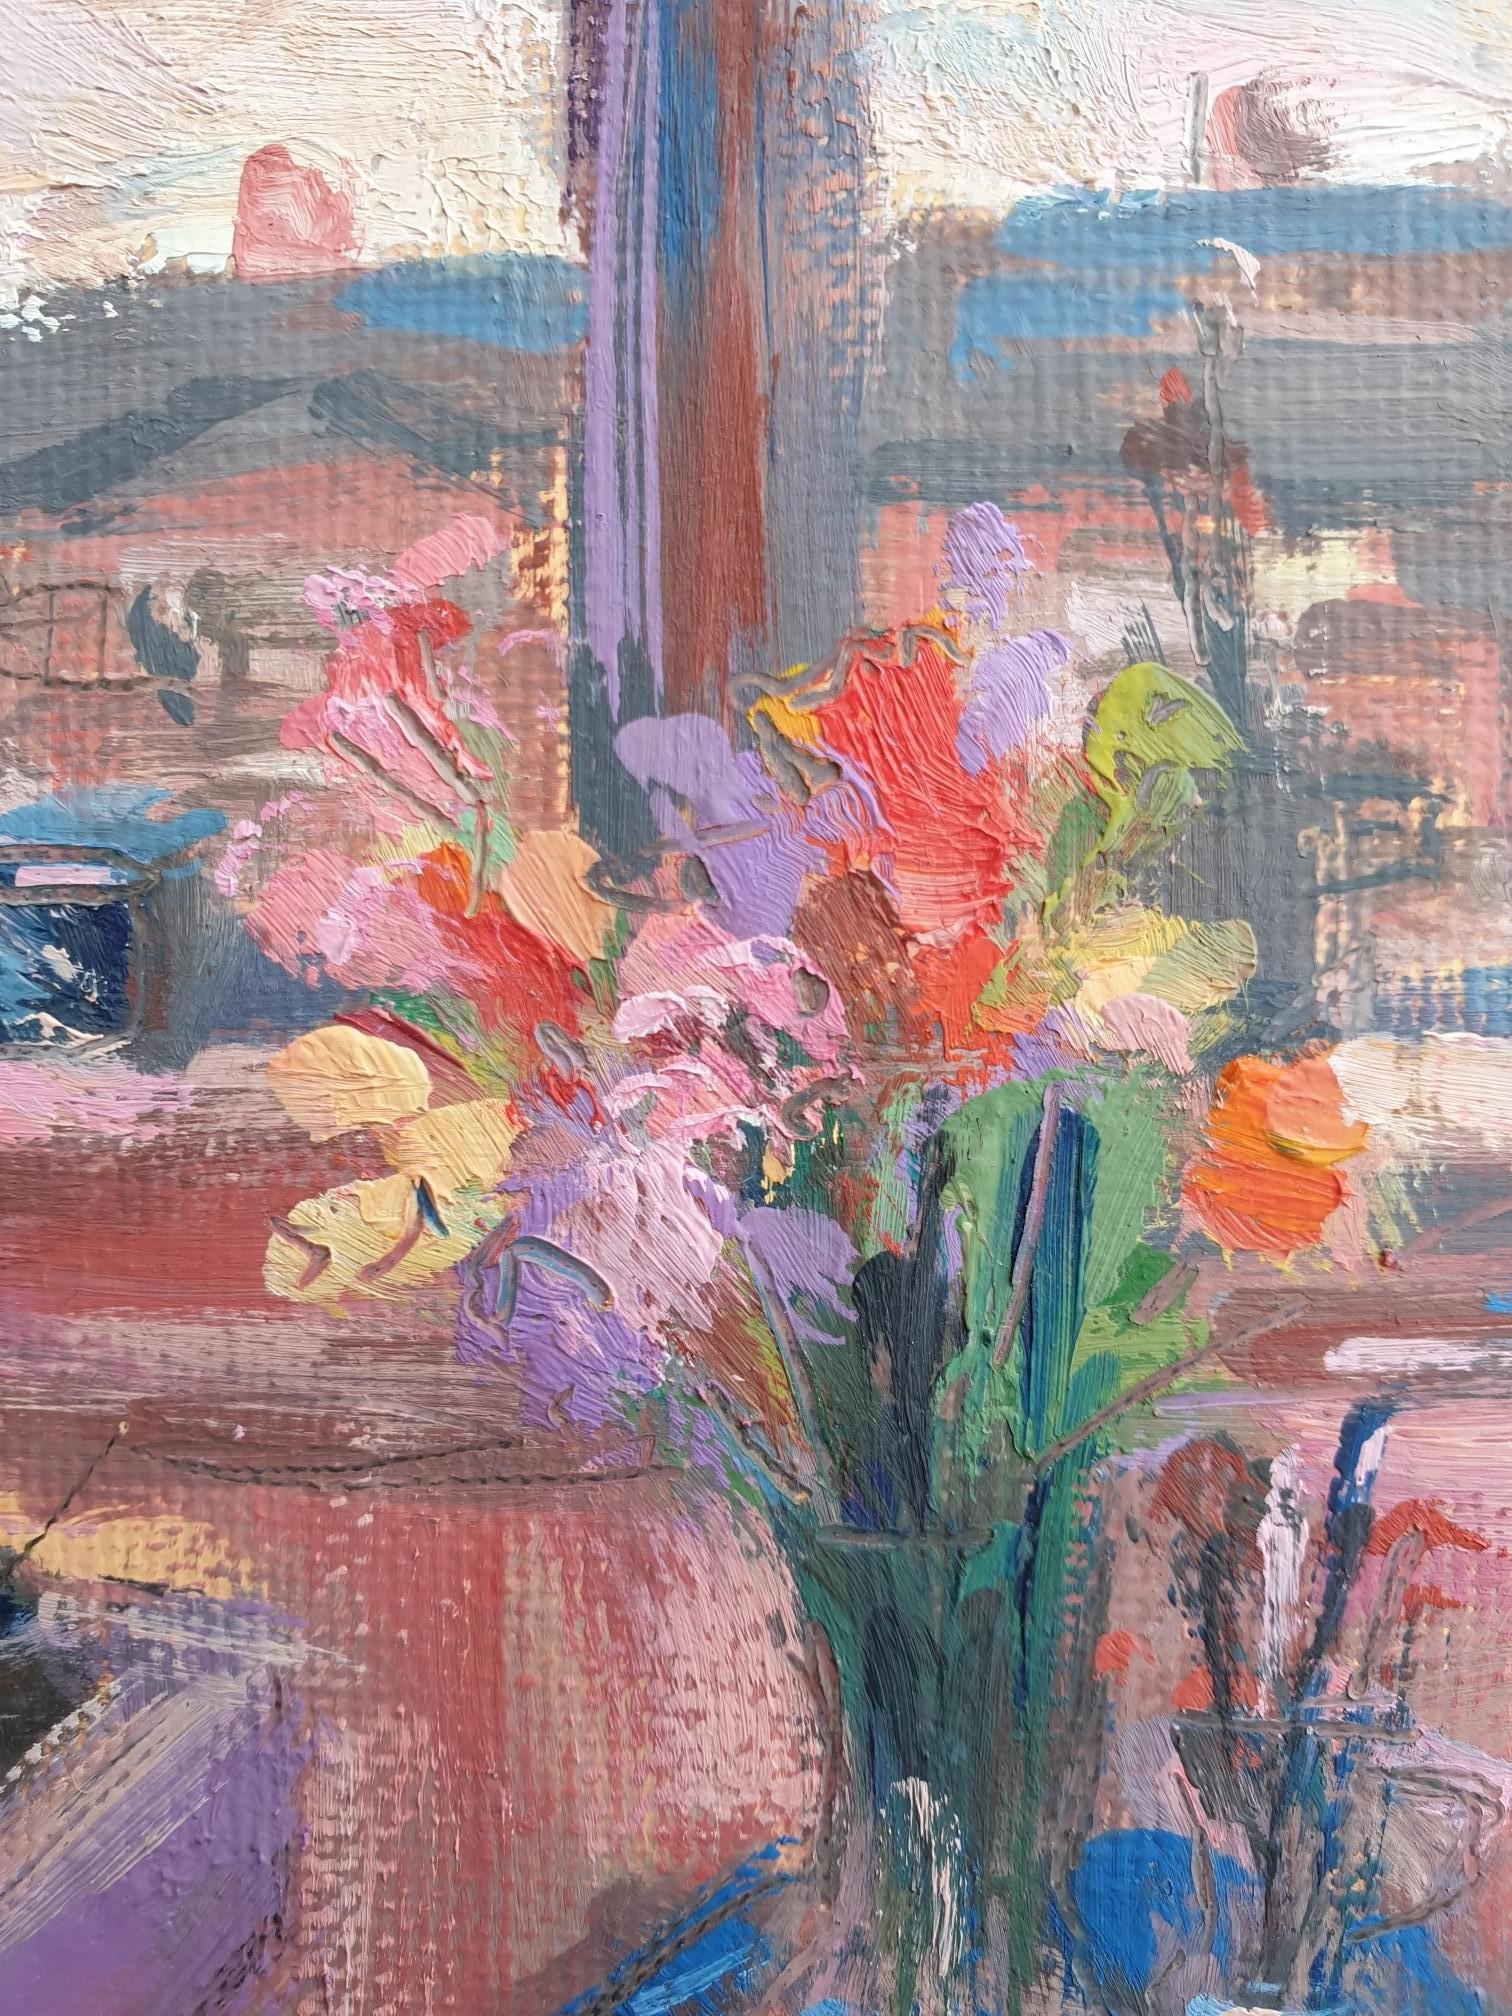 Studio Window by Charmaine Chaudry [2021]
original

Oil paint on canvas board

Image size: H:20 cm x W:15 cm

Complete Size of Unframed Work: H:20 cm x W:15 cm x D:0.1cm

Sold Unframed

Please note that insitu images are purely an indication of how